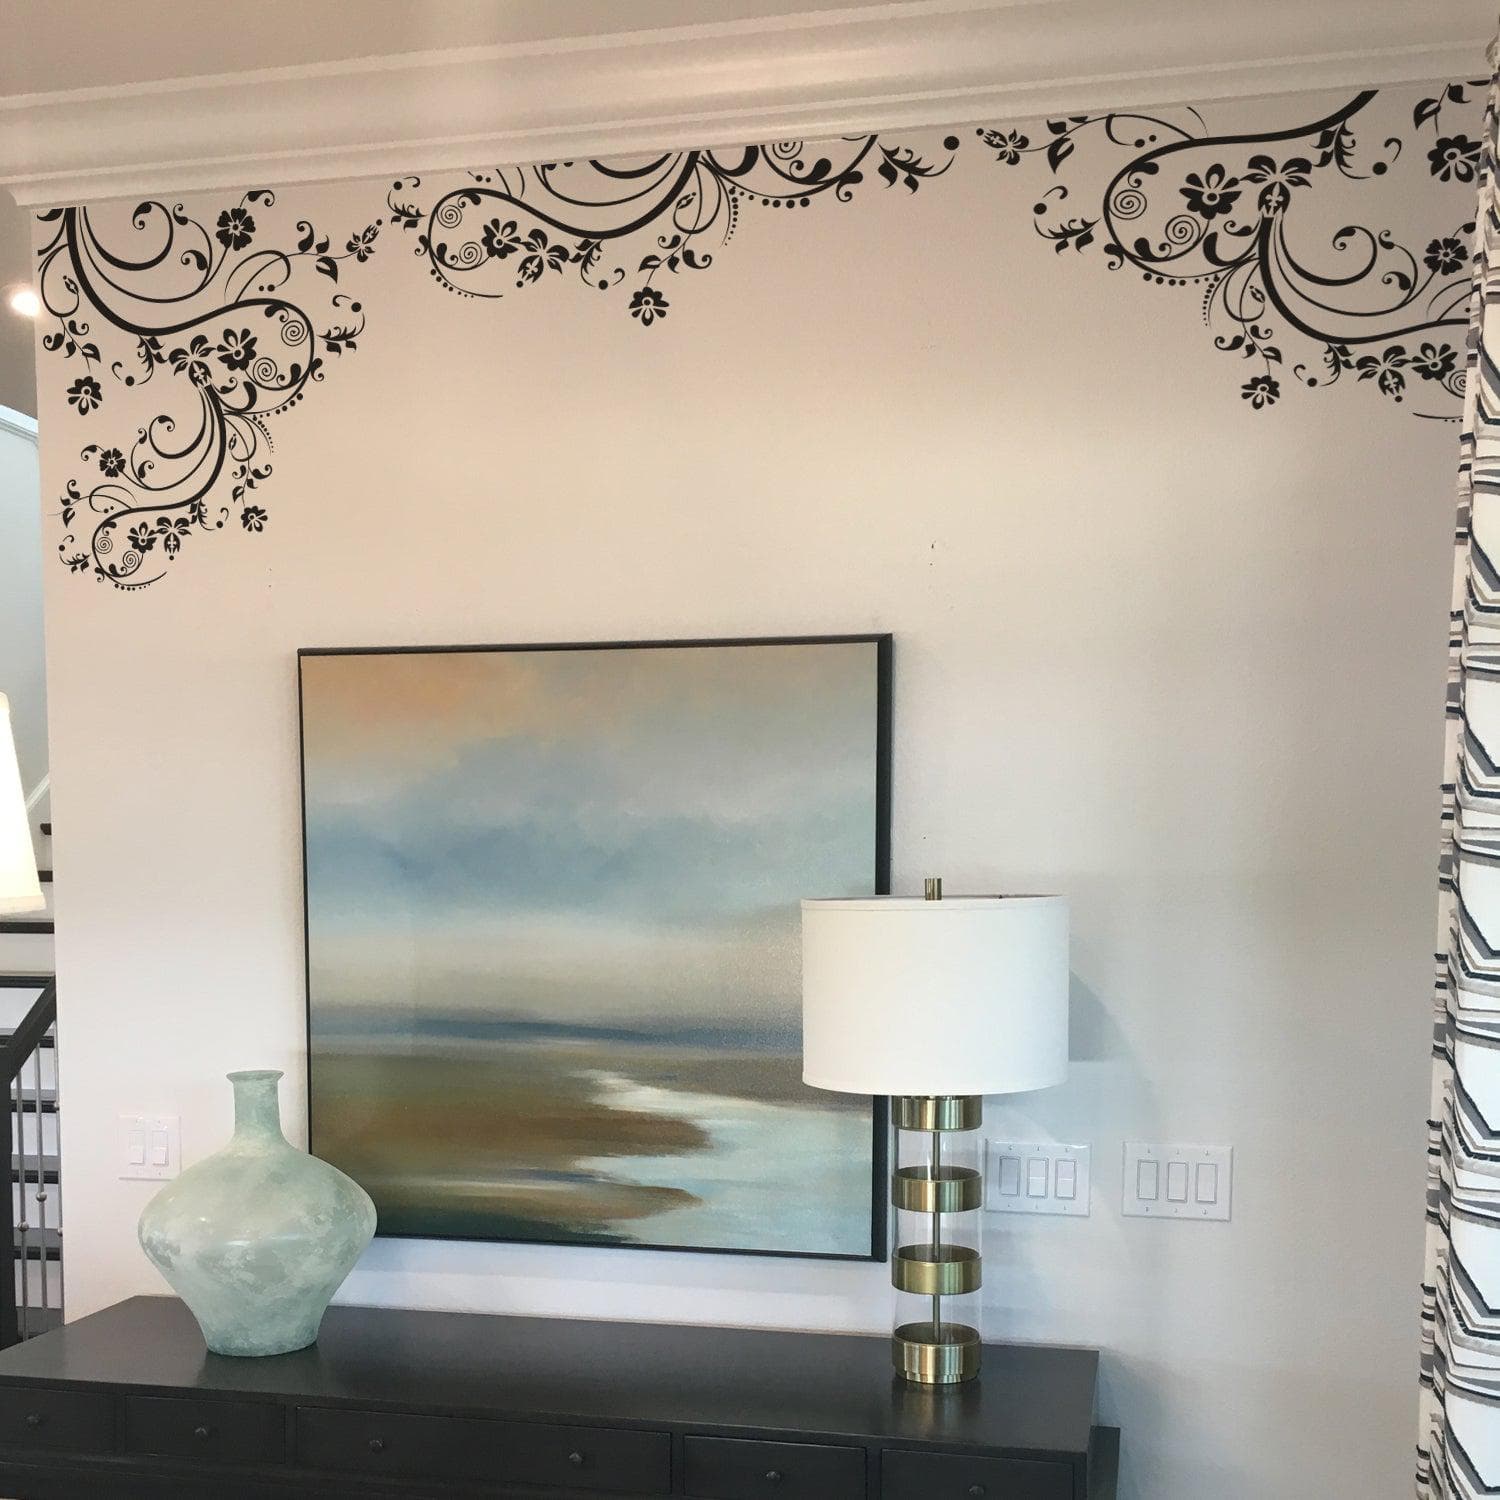 Black floral swirling decals on a white wall above a framed painting.